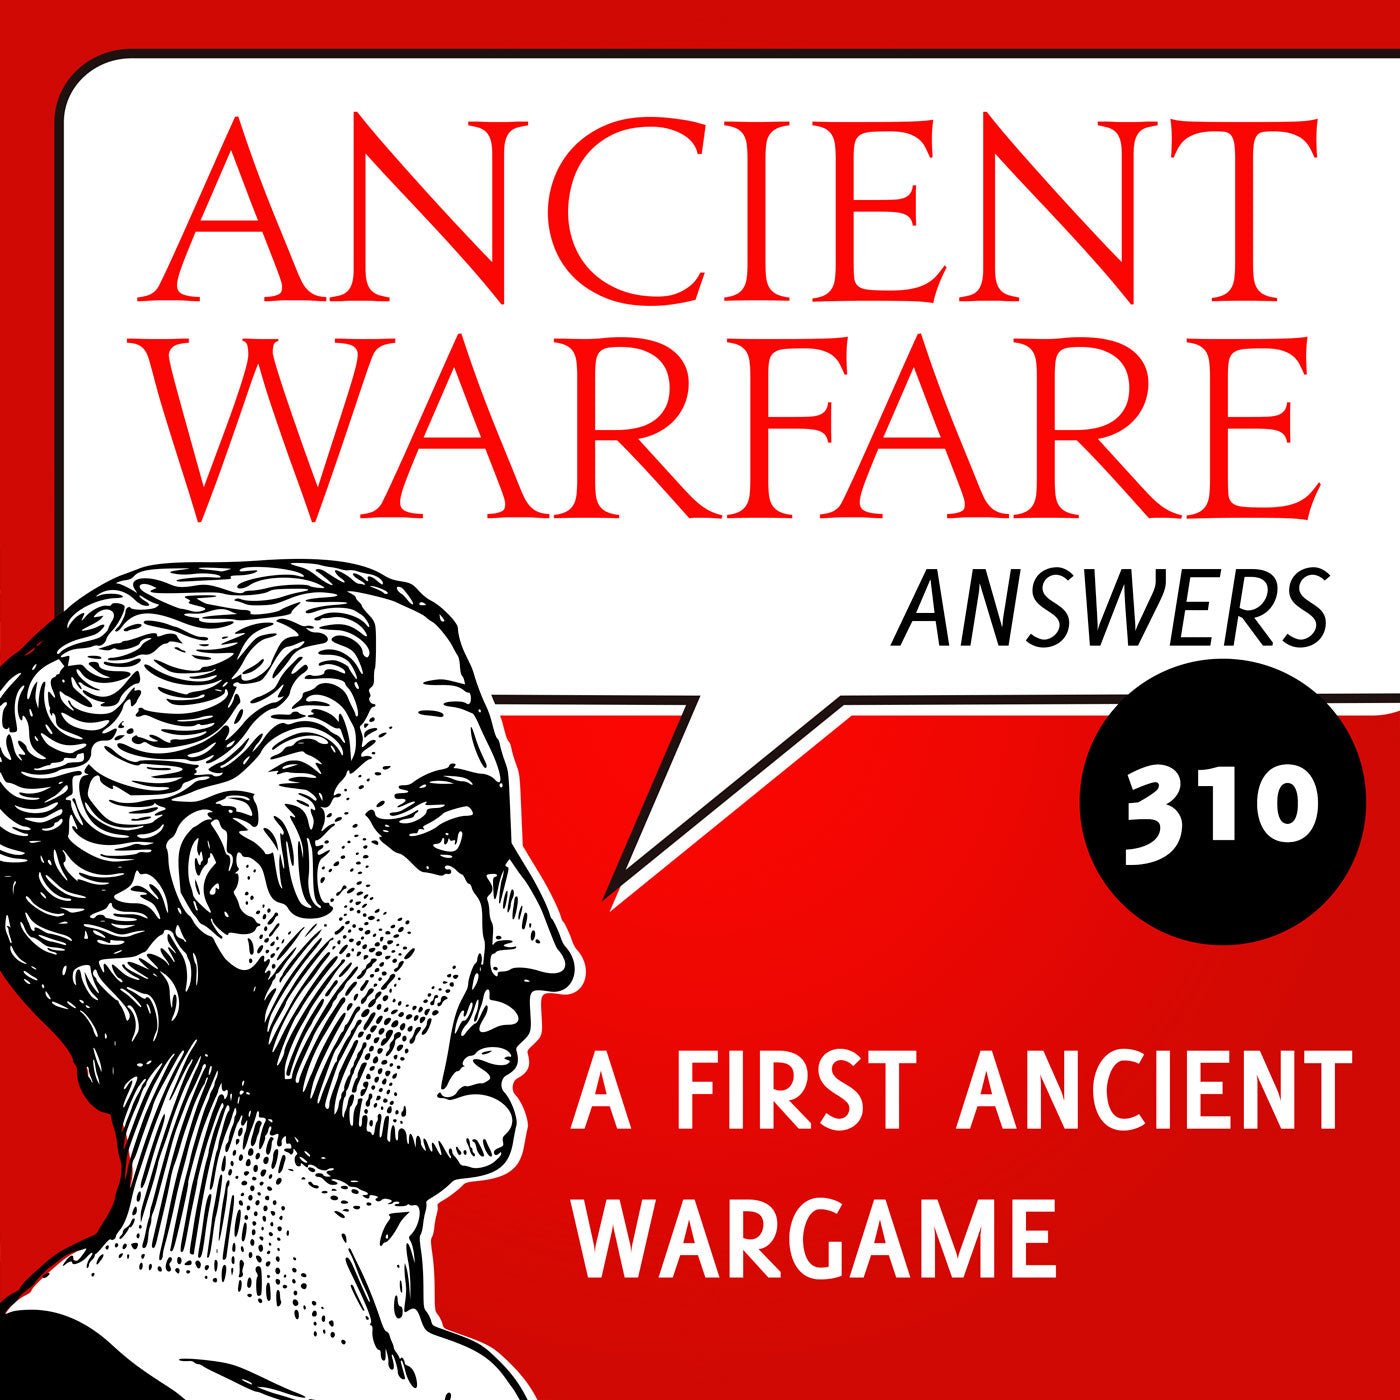 Ancient Warfare Answers (310): A first ancient wargame